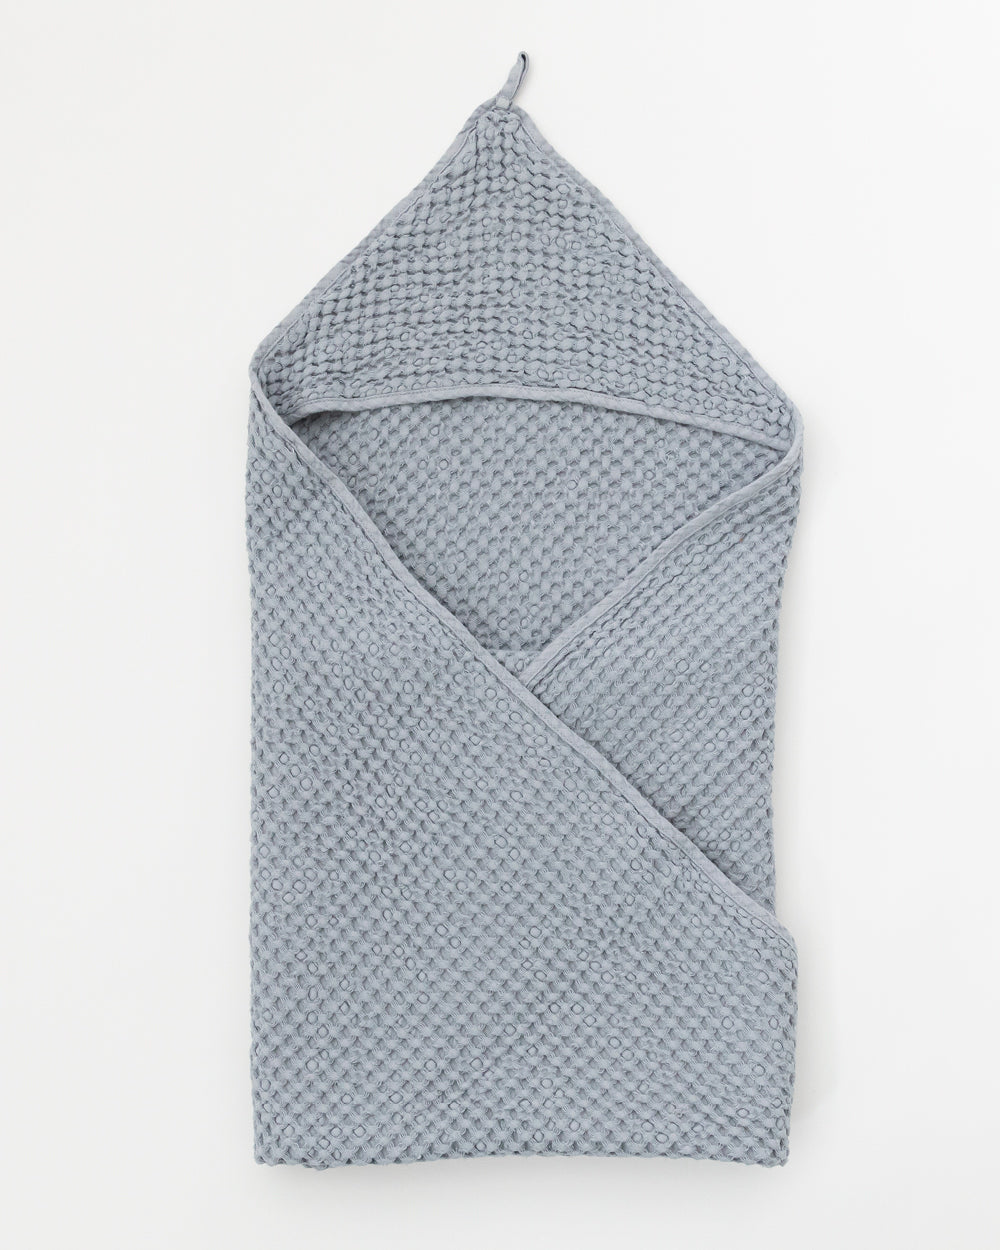 Flat folded Hooded Waffle Towel in blue grey colour.